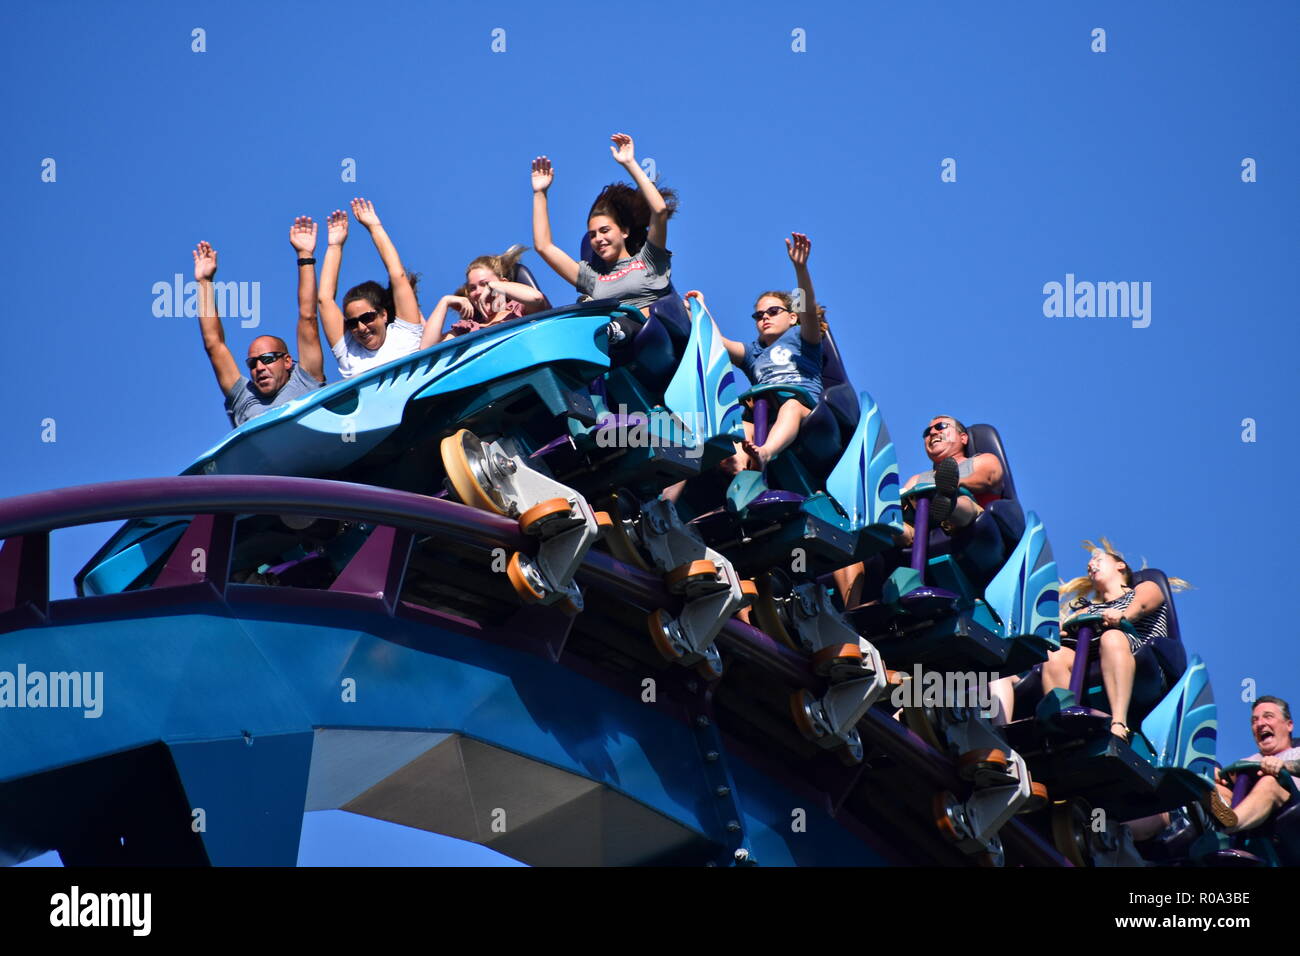 Orlando, Florida; October 10, 2018  People having fun and raising arms in Rollercoaster at International Drive area Stock Photo